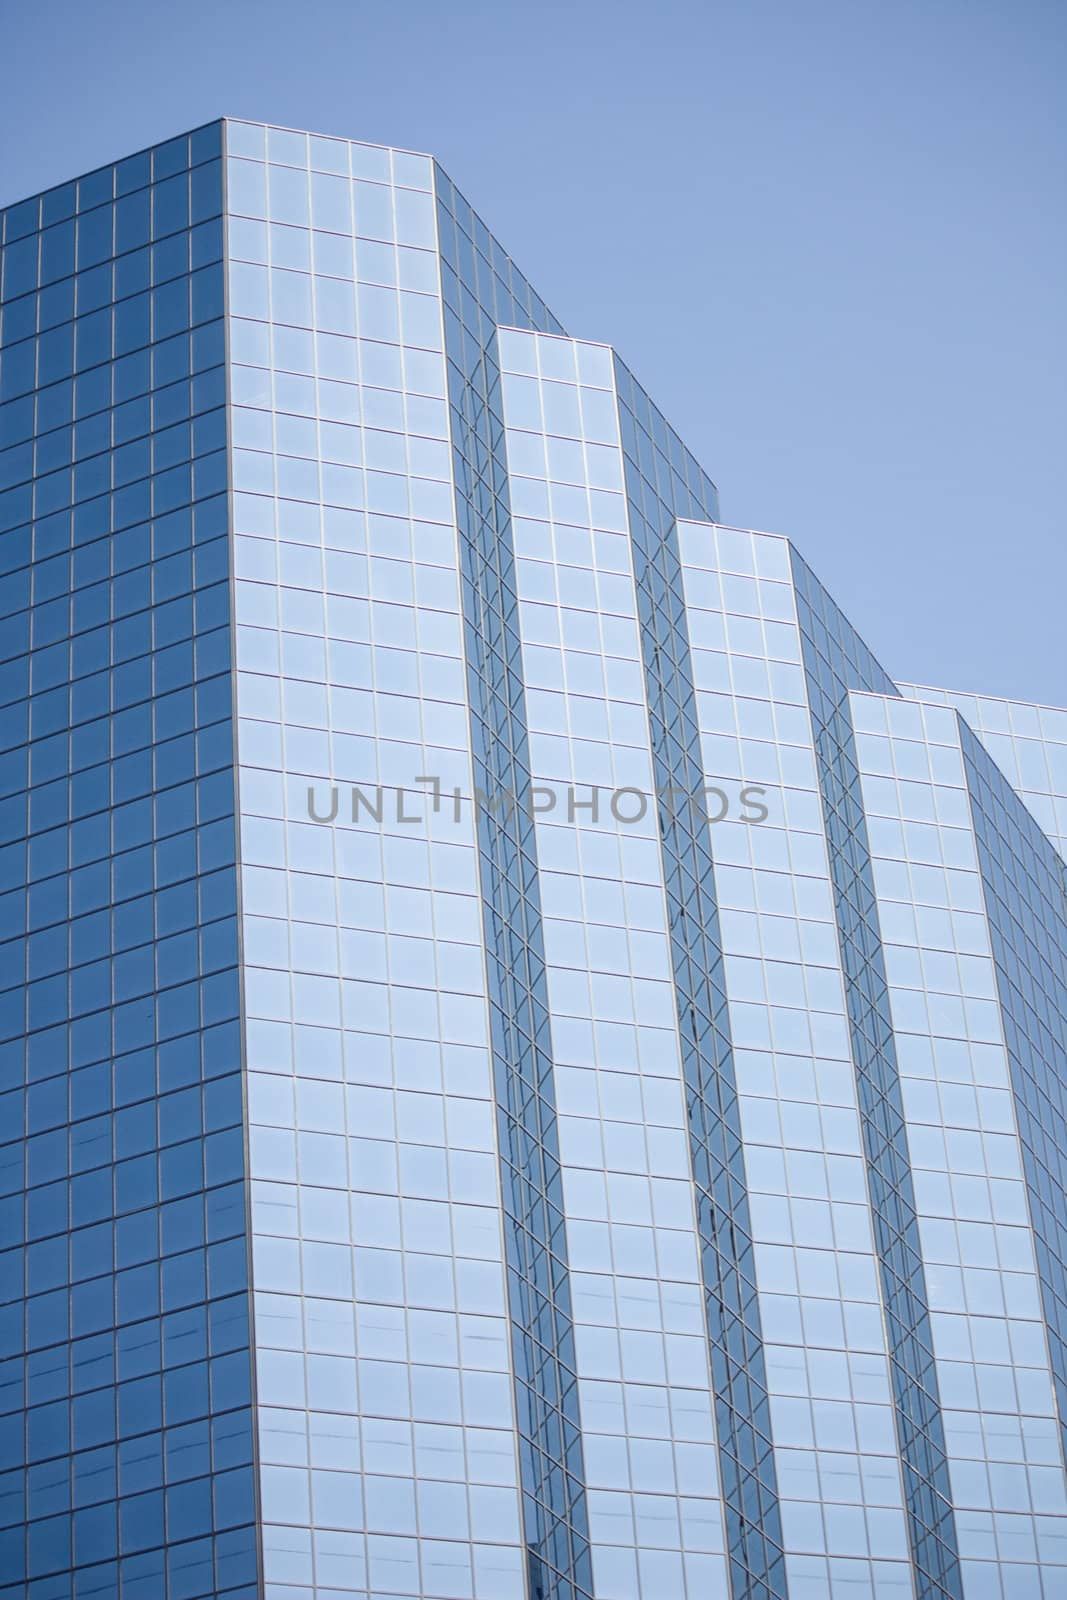 Skyscraper Glass Window Panel Office Building set against a blue sky background.